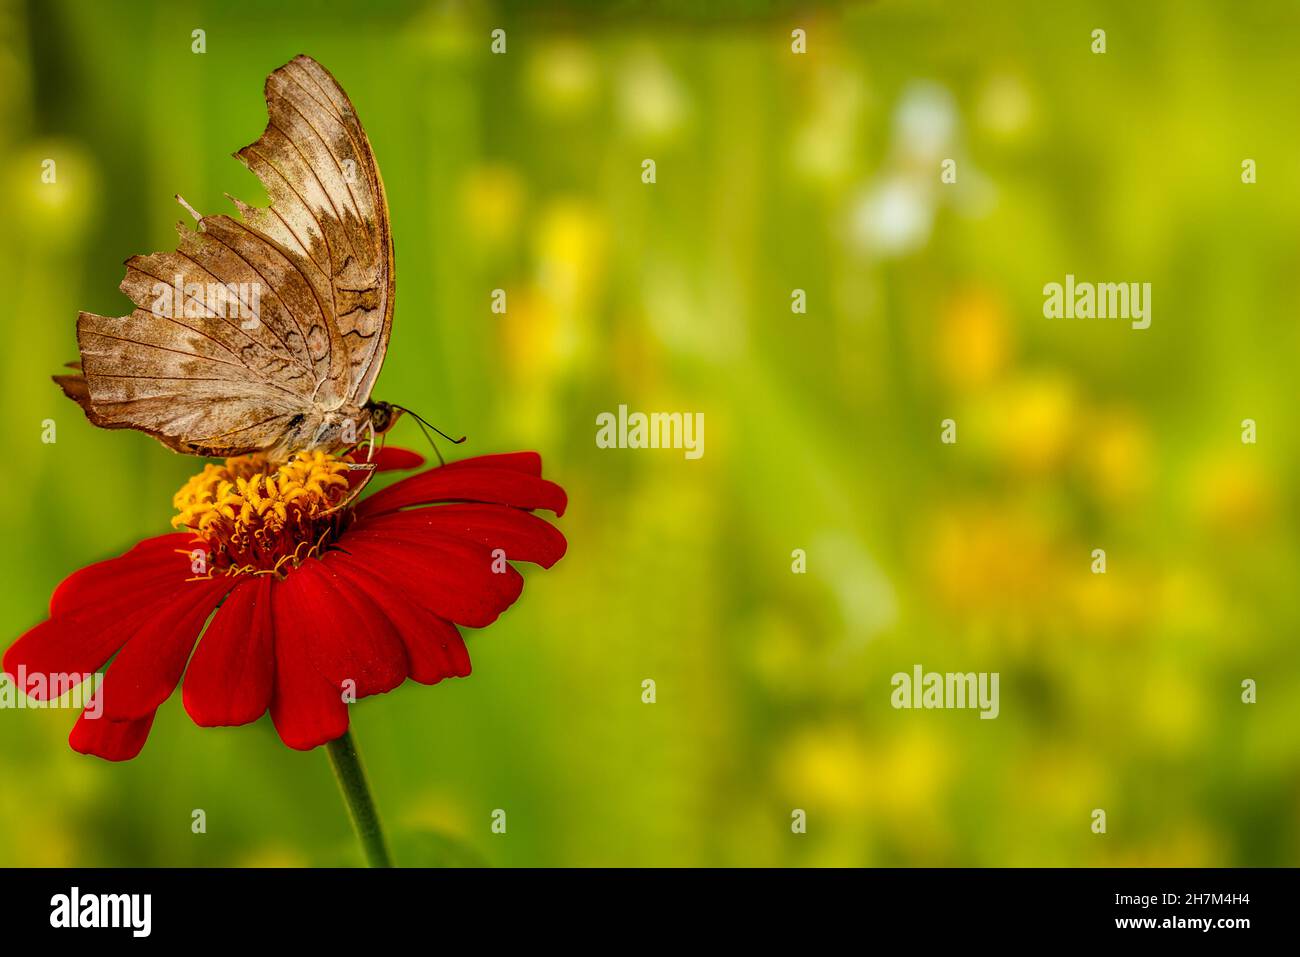 A brown butterfly perched on a red zinnia flower, has a soft green grass background and warm sunlight, copy space Stock Photo